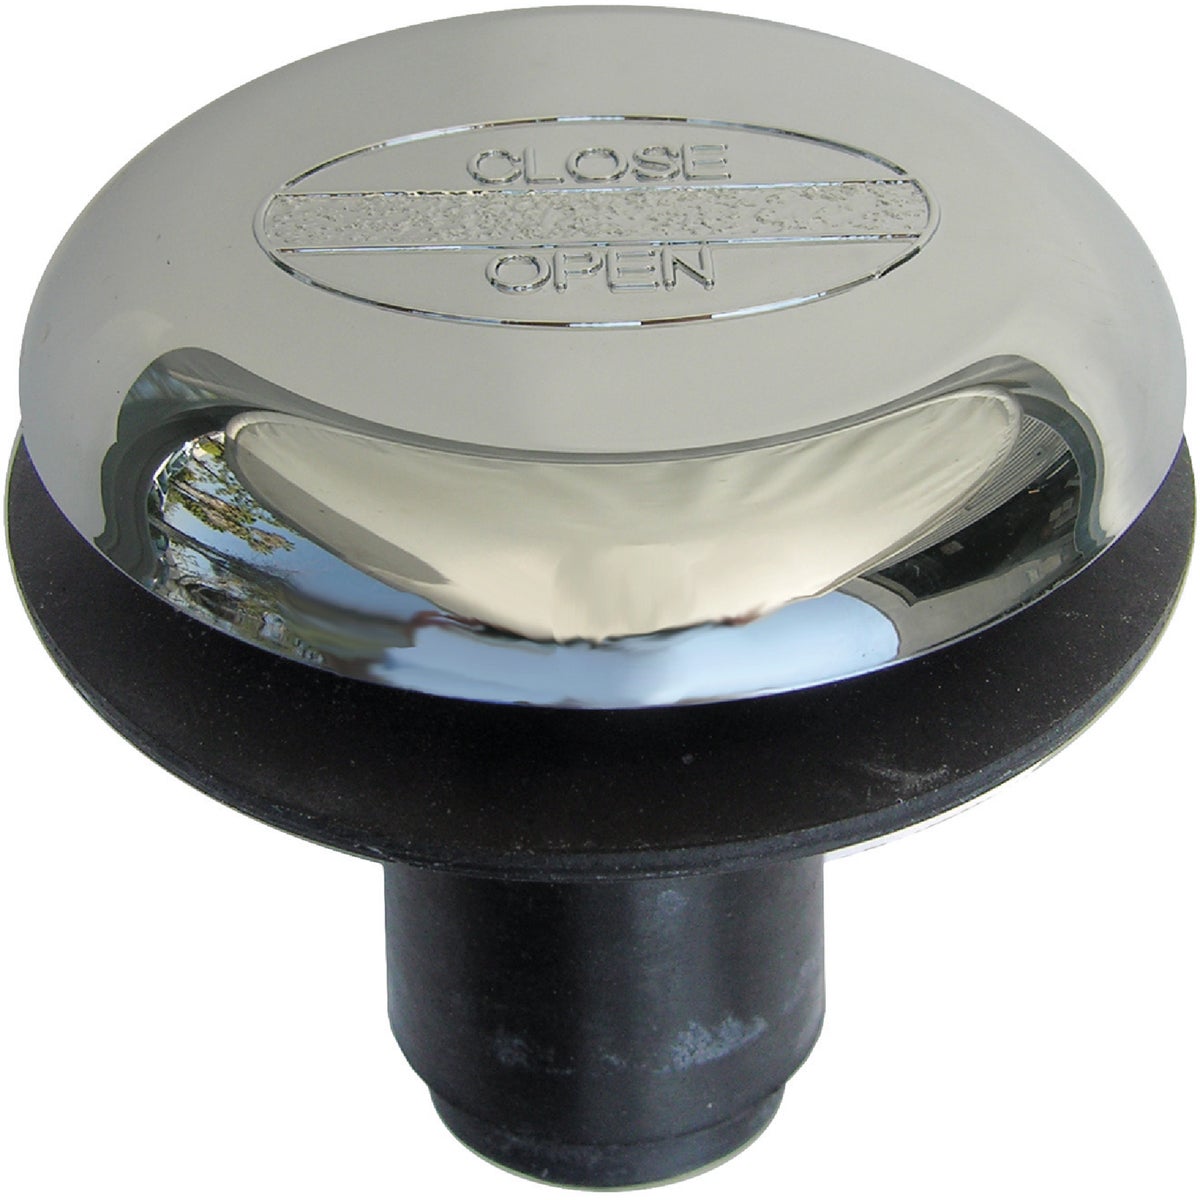 Lasco 3/8 In. x 2 In. Rapid Fit Tip Toe Bathtub Drain Stopper with Chrome Plated Finish